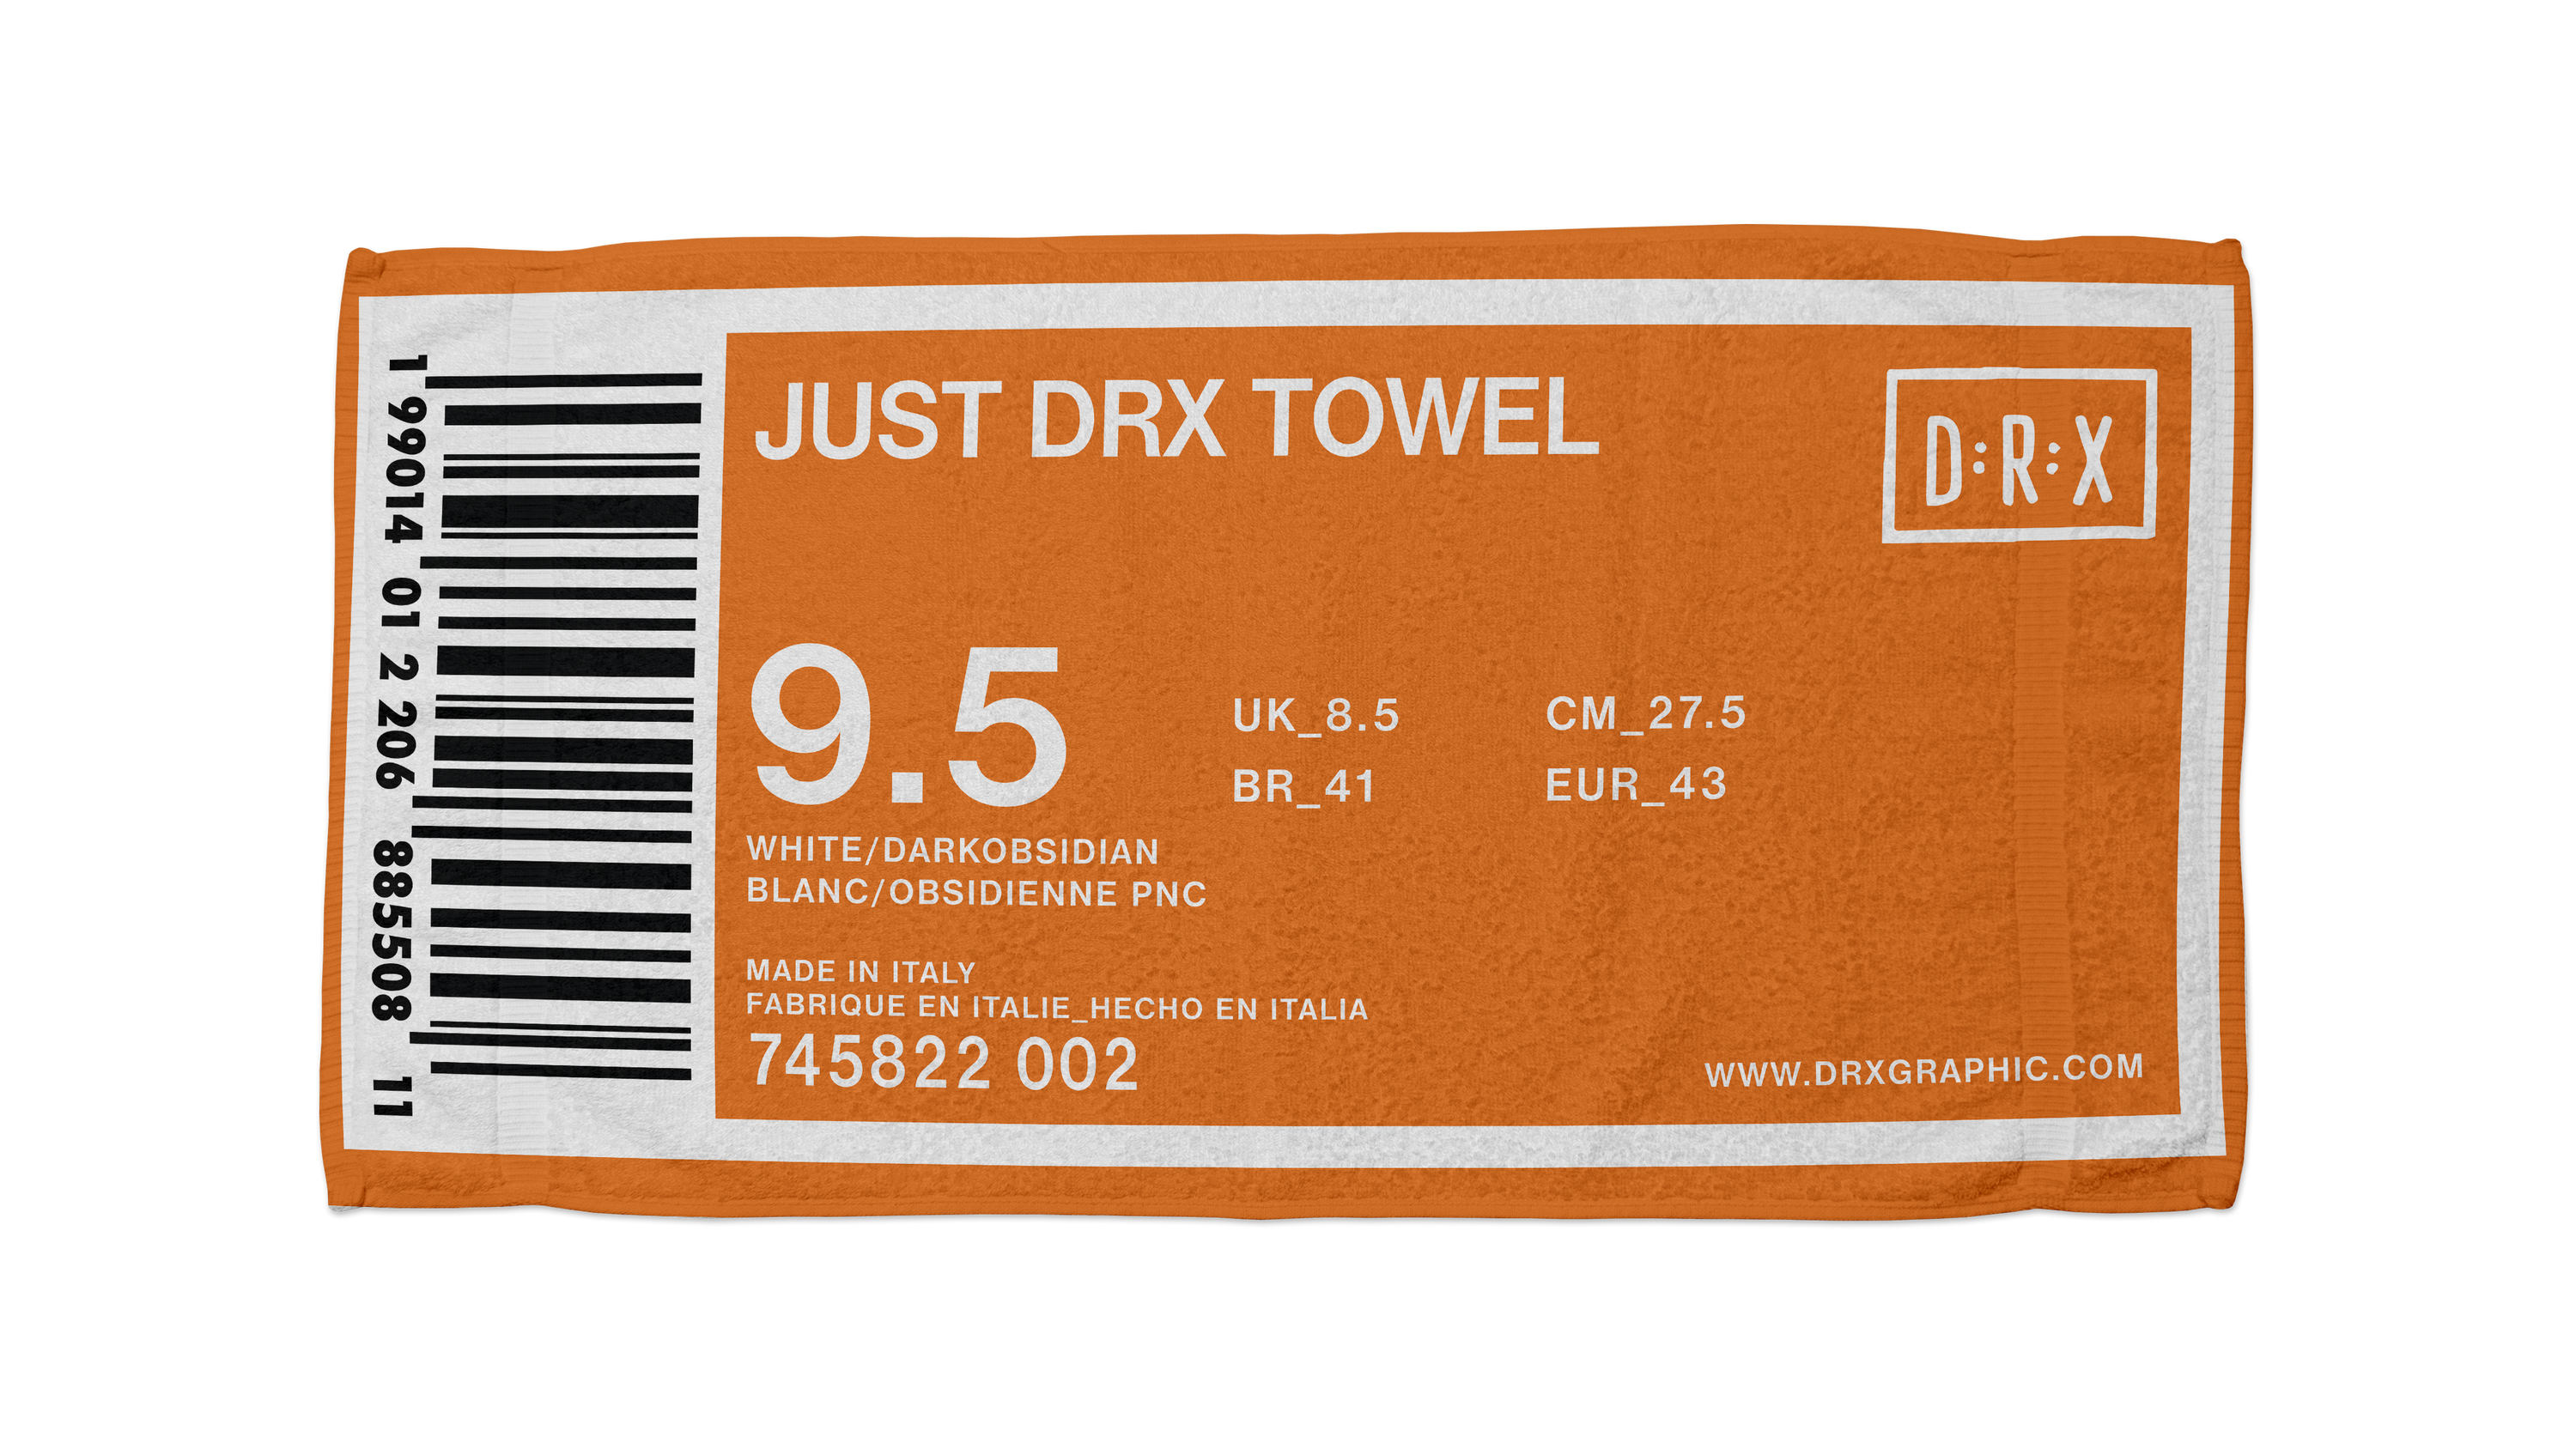 Just DRX Towel - AM1